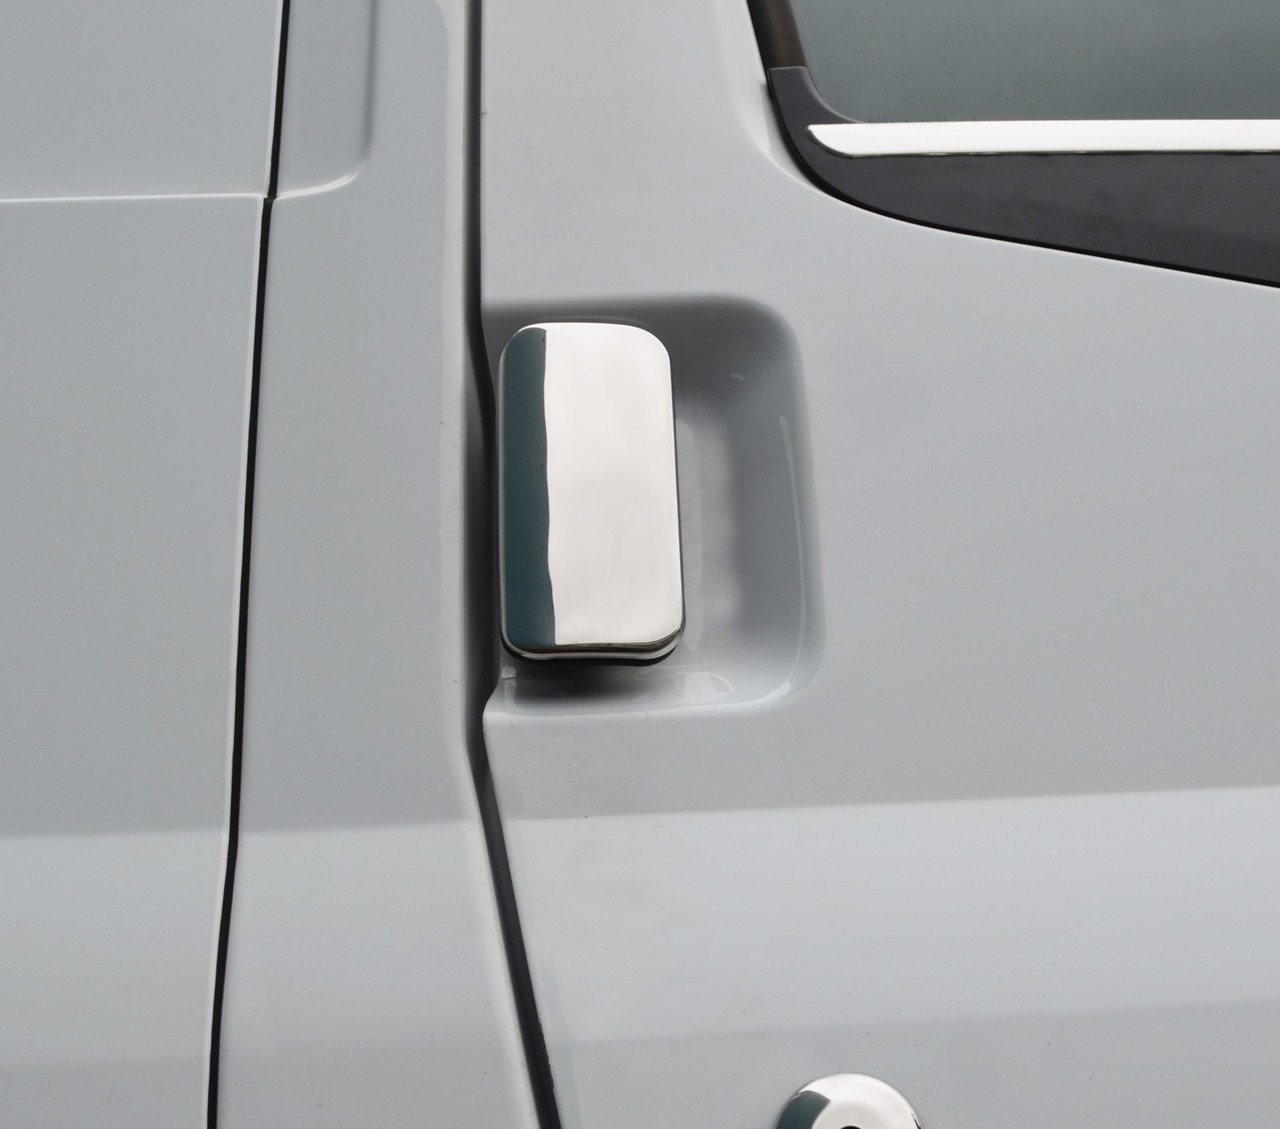 Chrome Door Handle Trim Set Covers To Fit Ford Transit 4dr (2000-13)